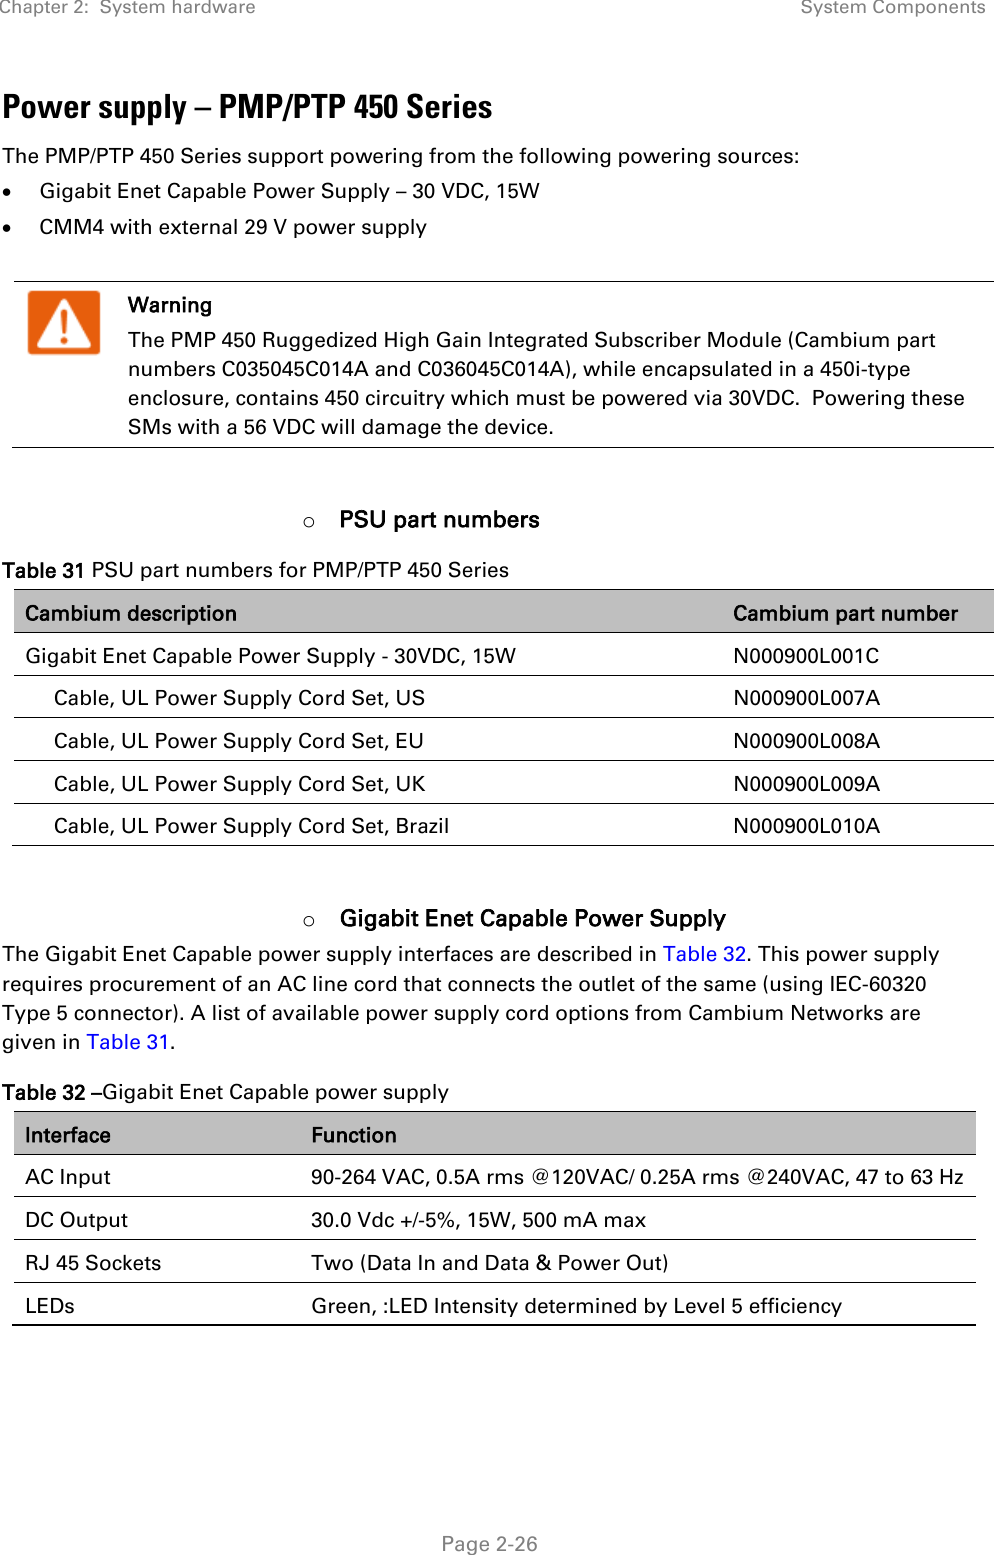 Chapter 2:  System hardware System Components   Page 2-26 Power supply – PMP/PTP 450 Series The PMP/PTP 450 Series support powering from the following powering sources: • Gigabit Enet Capable Power Supply – 30 VDC, 15W  • CMM4 with external 29 V power supply   Warning The PMP 450 Ruggedized High Gain Integrated Subscriber Module (Cambium part numbers C035045C014A and C036045C014A), while encapsulated in a 450i-type enclosure, contains 450 circuitry which must be powered via 30VDC.  Powering these SMs with a 56 VDC will damage the device.  o PSU part numbers Table 31 PSU part numbers for PMP/PTP 450 Series Cambium description Cambium part number Gigabit Enet Capable Power Supply - 30VDC, 15W N000900L001C      Cable, UL Power Supply Cord Set, US N000900L007A      Cable, UL Power Supply Cord Set, EU N000900L008A      Cable, UL Power Supply Cord Set, UK N000900L009A      Cable, UL Power Supply Cord Set, Brazil N000900L010A  o Gigabit Enet Capable Power Supply The Gigabit Enet Capable power supply interfaces are described in Table 32. This power supply requires procurement of an AC line cord that connects the outlet of the same (using IEC-60320 Type 5 connector). A list of available power supply cord options from Cambium Networks are given in Table 31. Table 32 –Gigabit Enet Capable power supply Interface Function AC Input 90-264 VAC, 0.5A rms @120VAC/ 0.25A rms @240VAC, 47 to 63 Hz DC Output 30.0 Vdc +/-5%, 15W, 500 mA max RJ 45 Sockets Two (Data In and Data &amp; Power Out) LEDs Green, :LED Intensity determined by Level 5 efficiency  